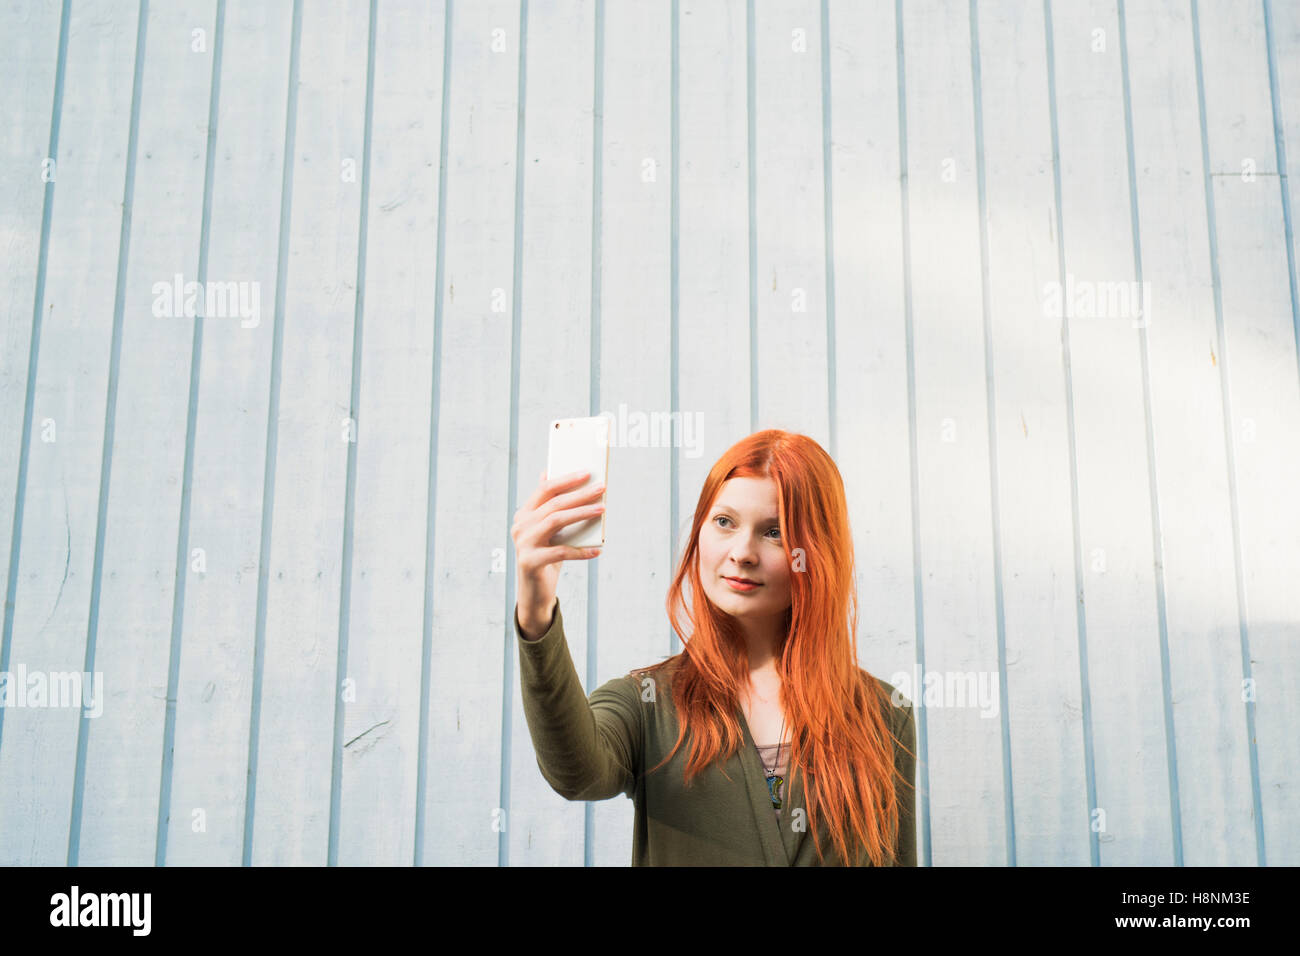 Redhaired woman taking selfie against white wall Stock Photo